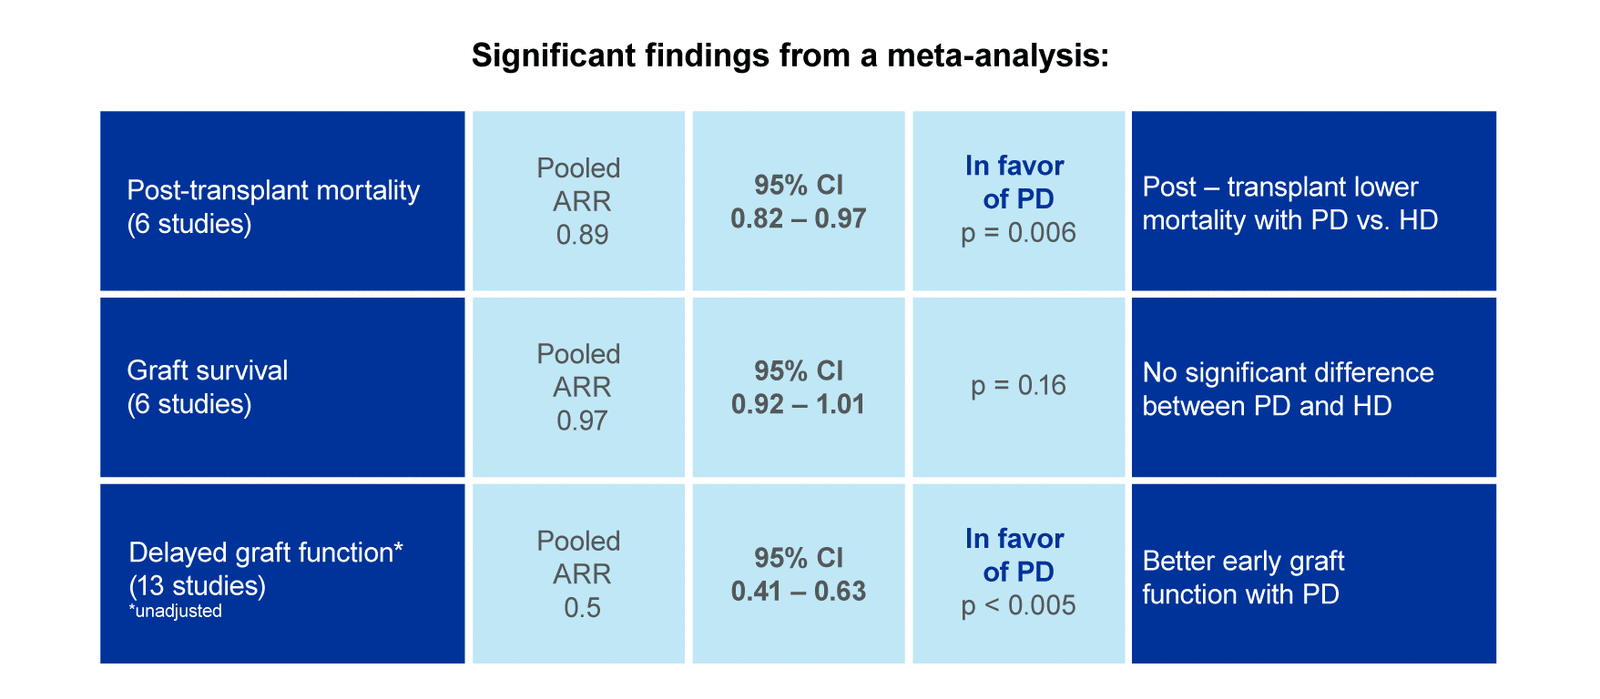 Chart showing significant findings from a meta-analysis